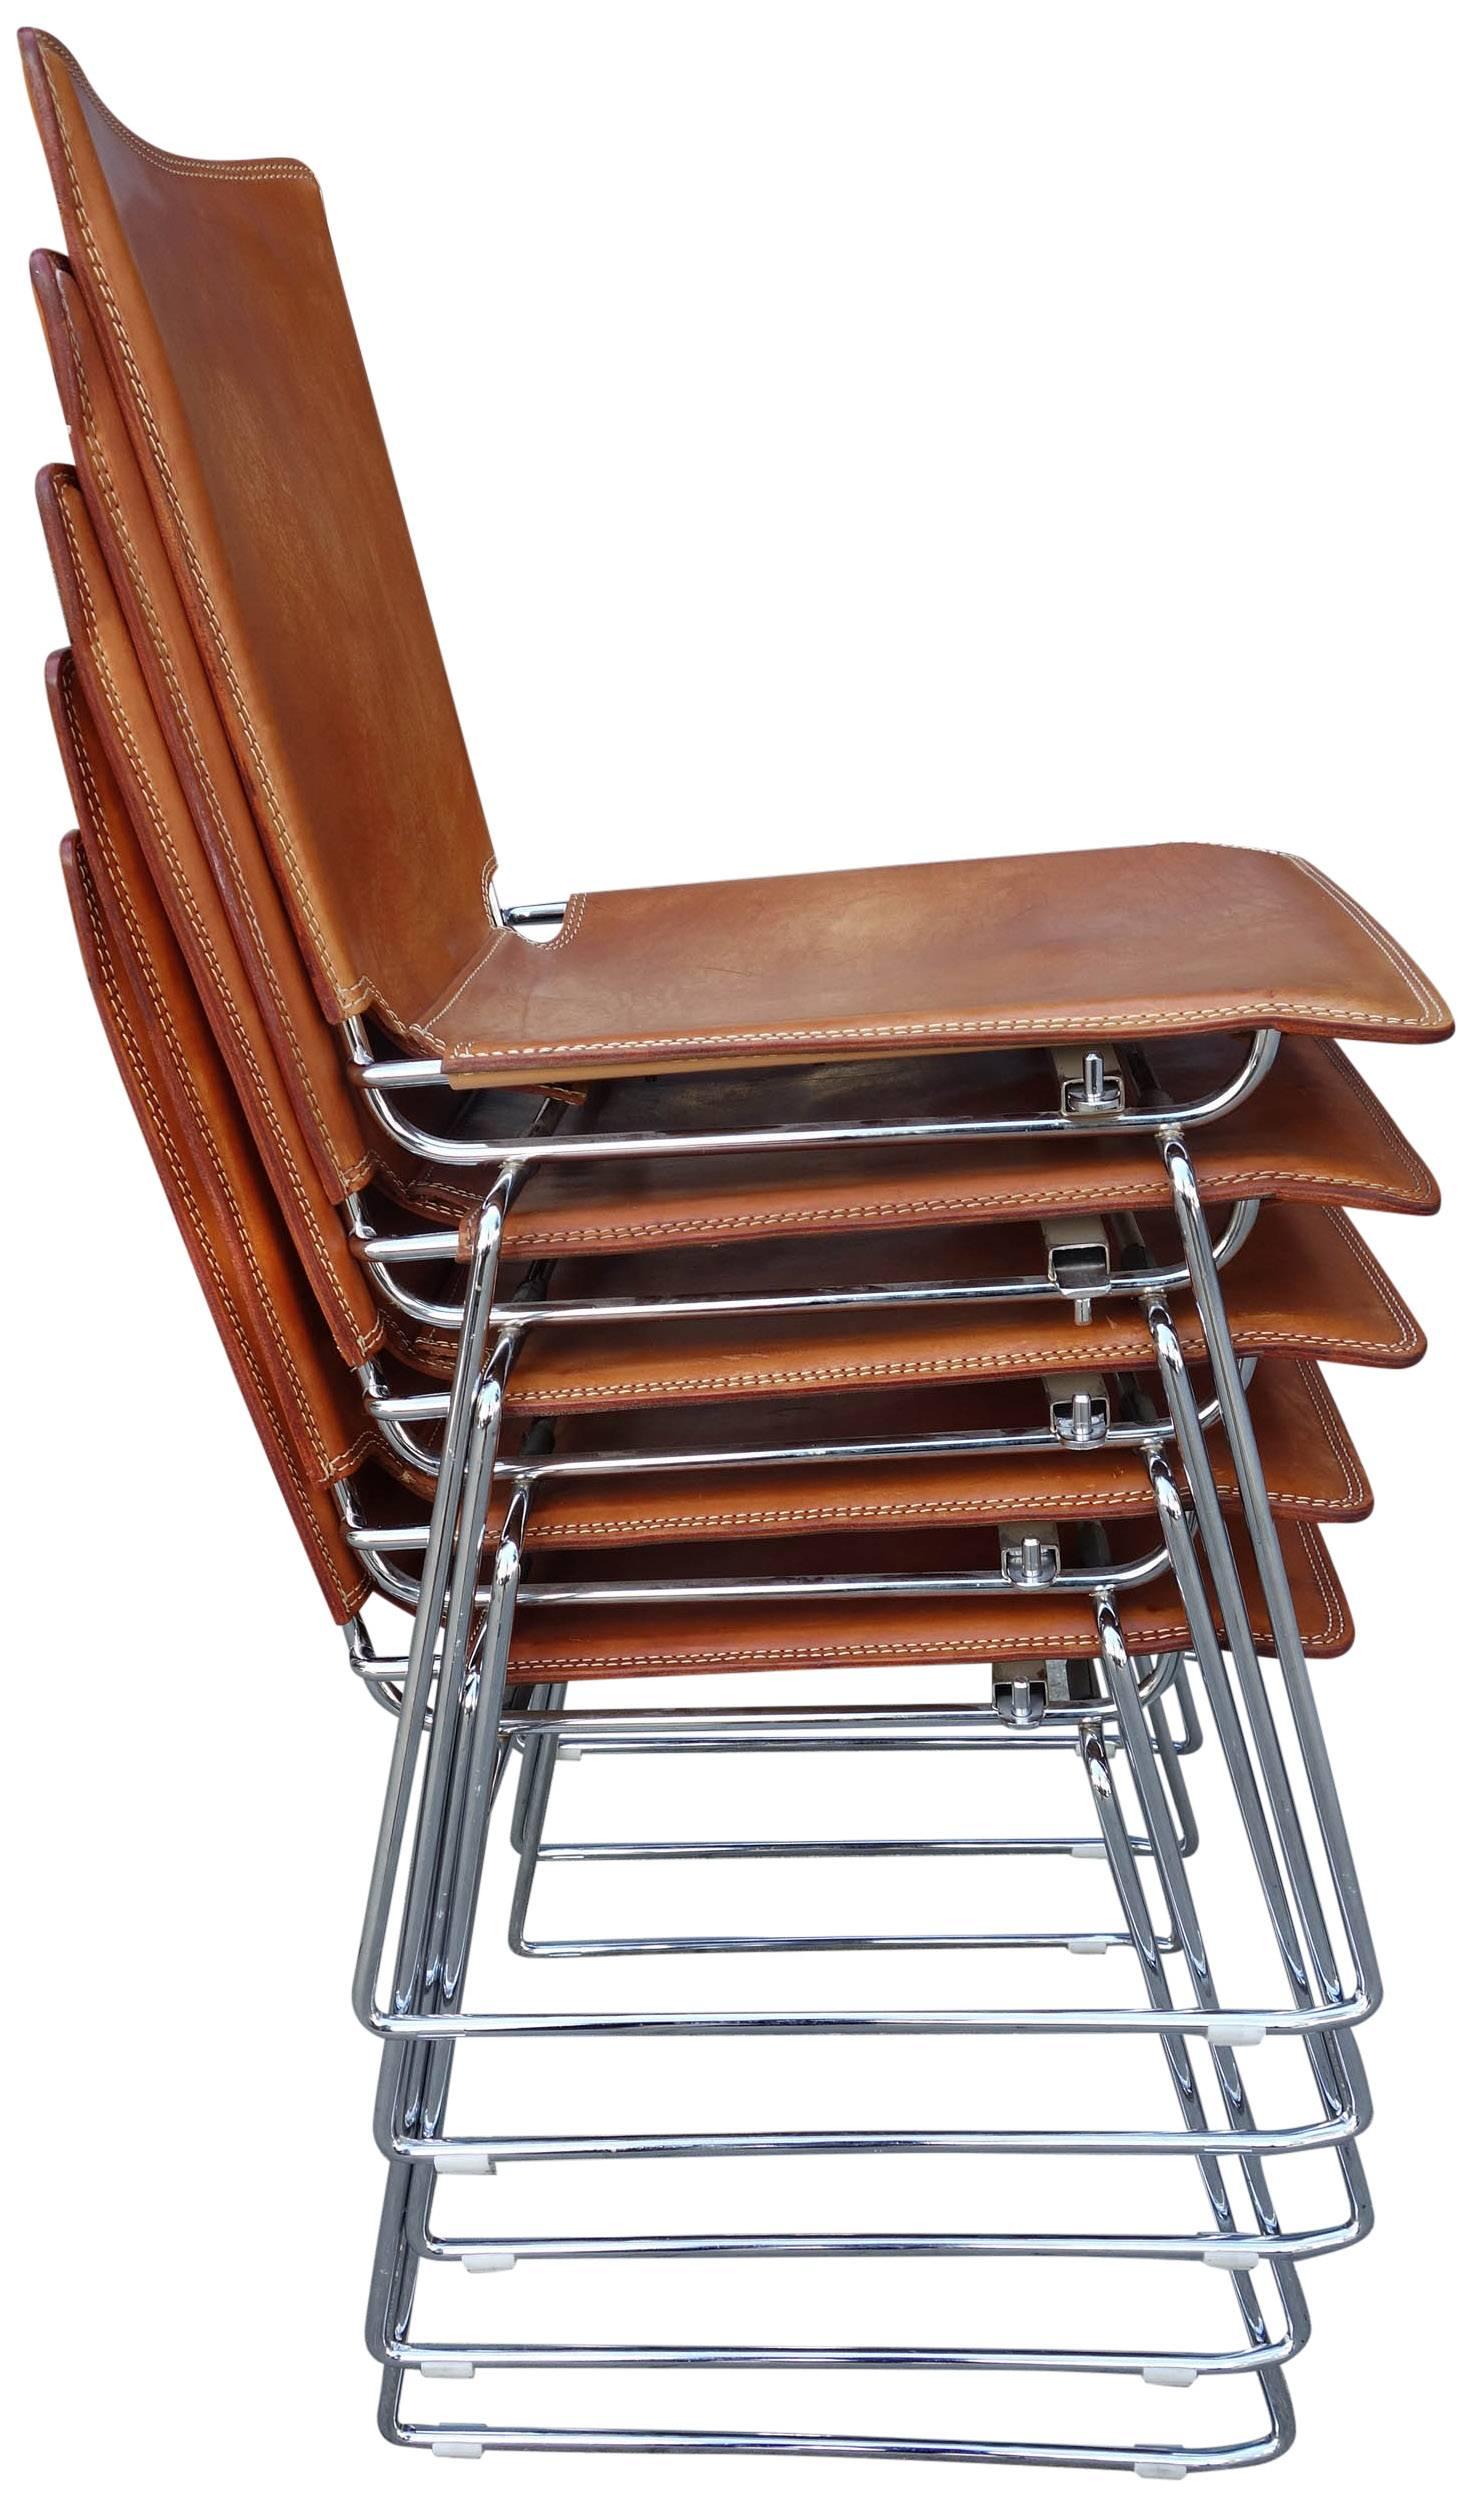 Incredible set of 20 stackable chairs by ICF. Designed by Toyoda Hiroyuki. Thick tanned saddle leather covering a heavily chromed base. Wonderful details of stitched and laced leather. These can easily be stacked in groups of 5 or ganged together by